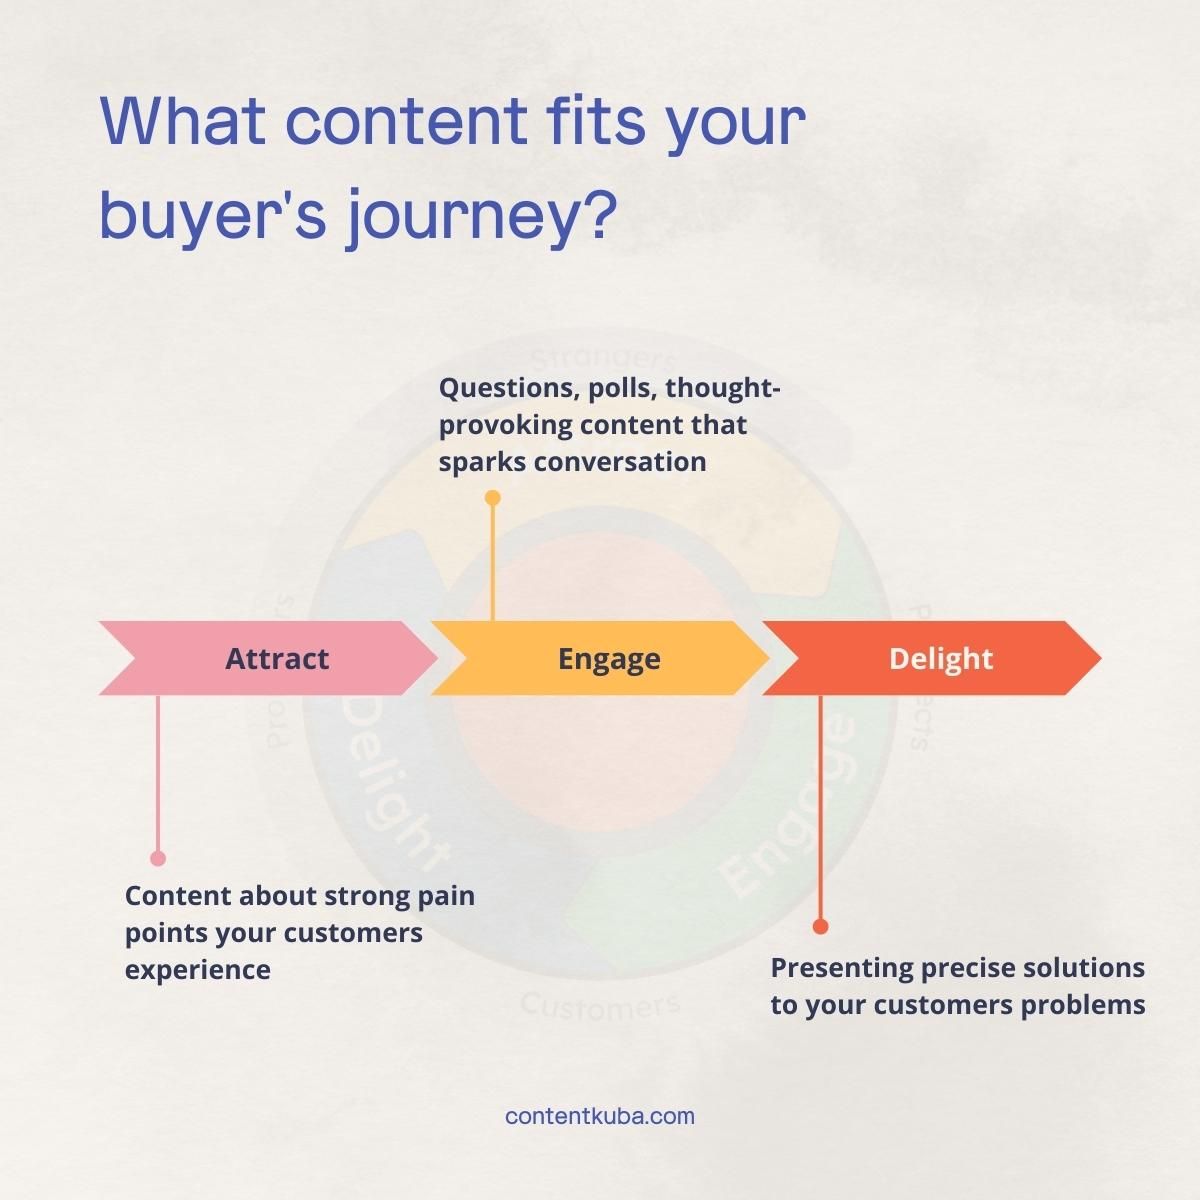 visual explanation of how to use the Flywheel model to get a sense of your buyer's journey